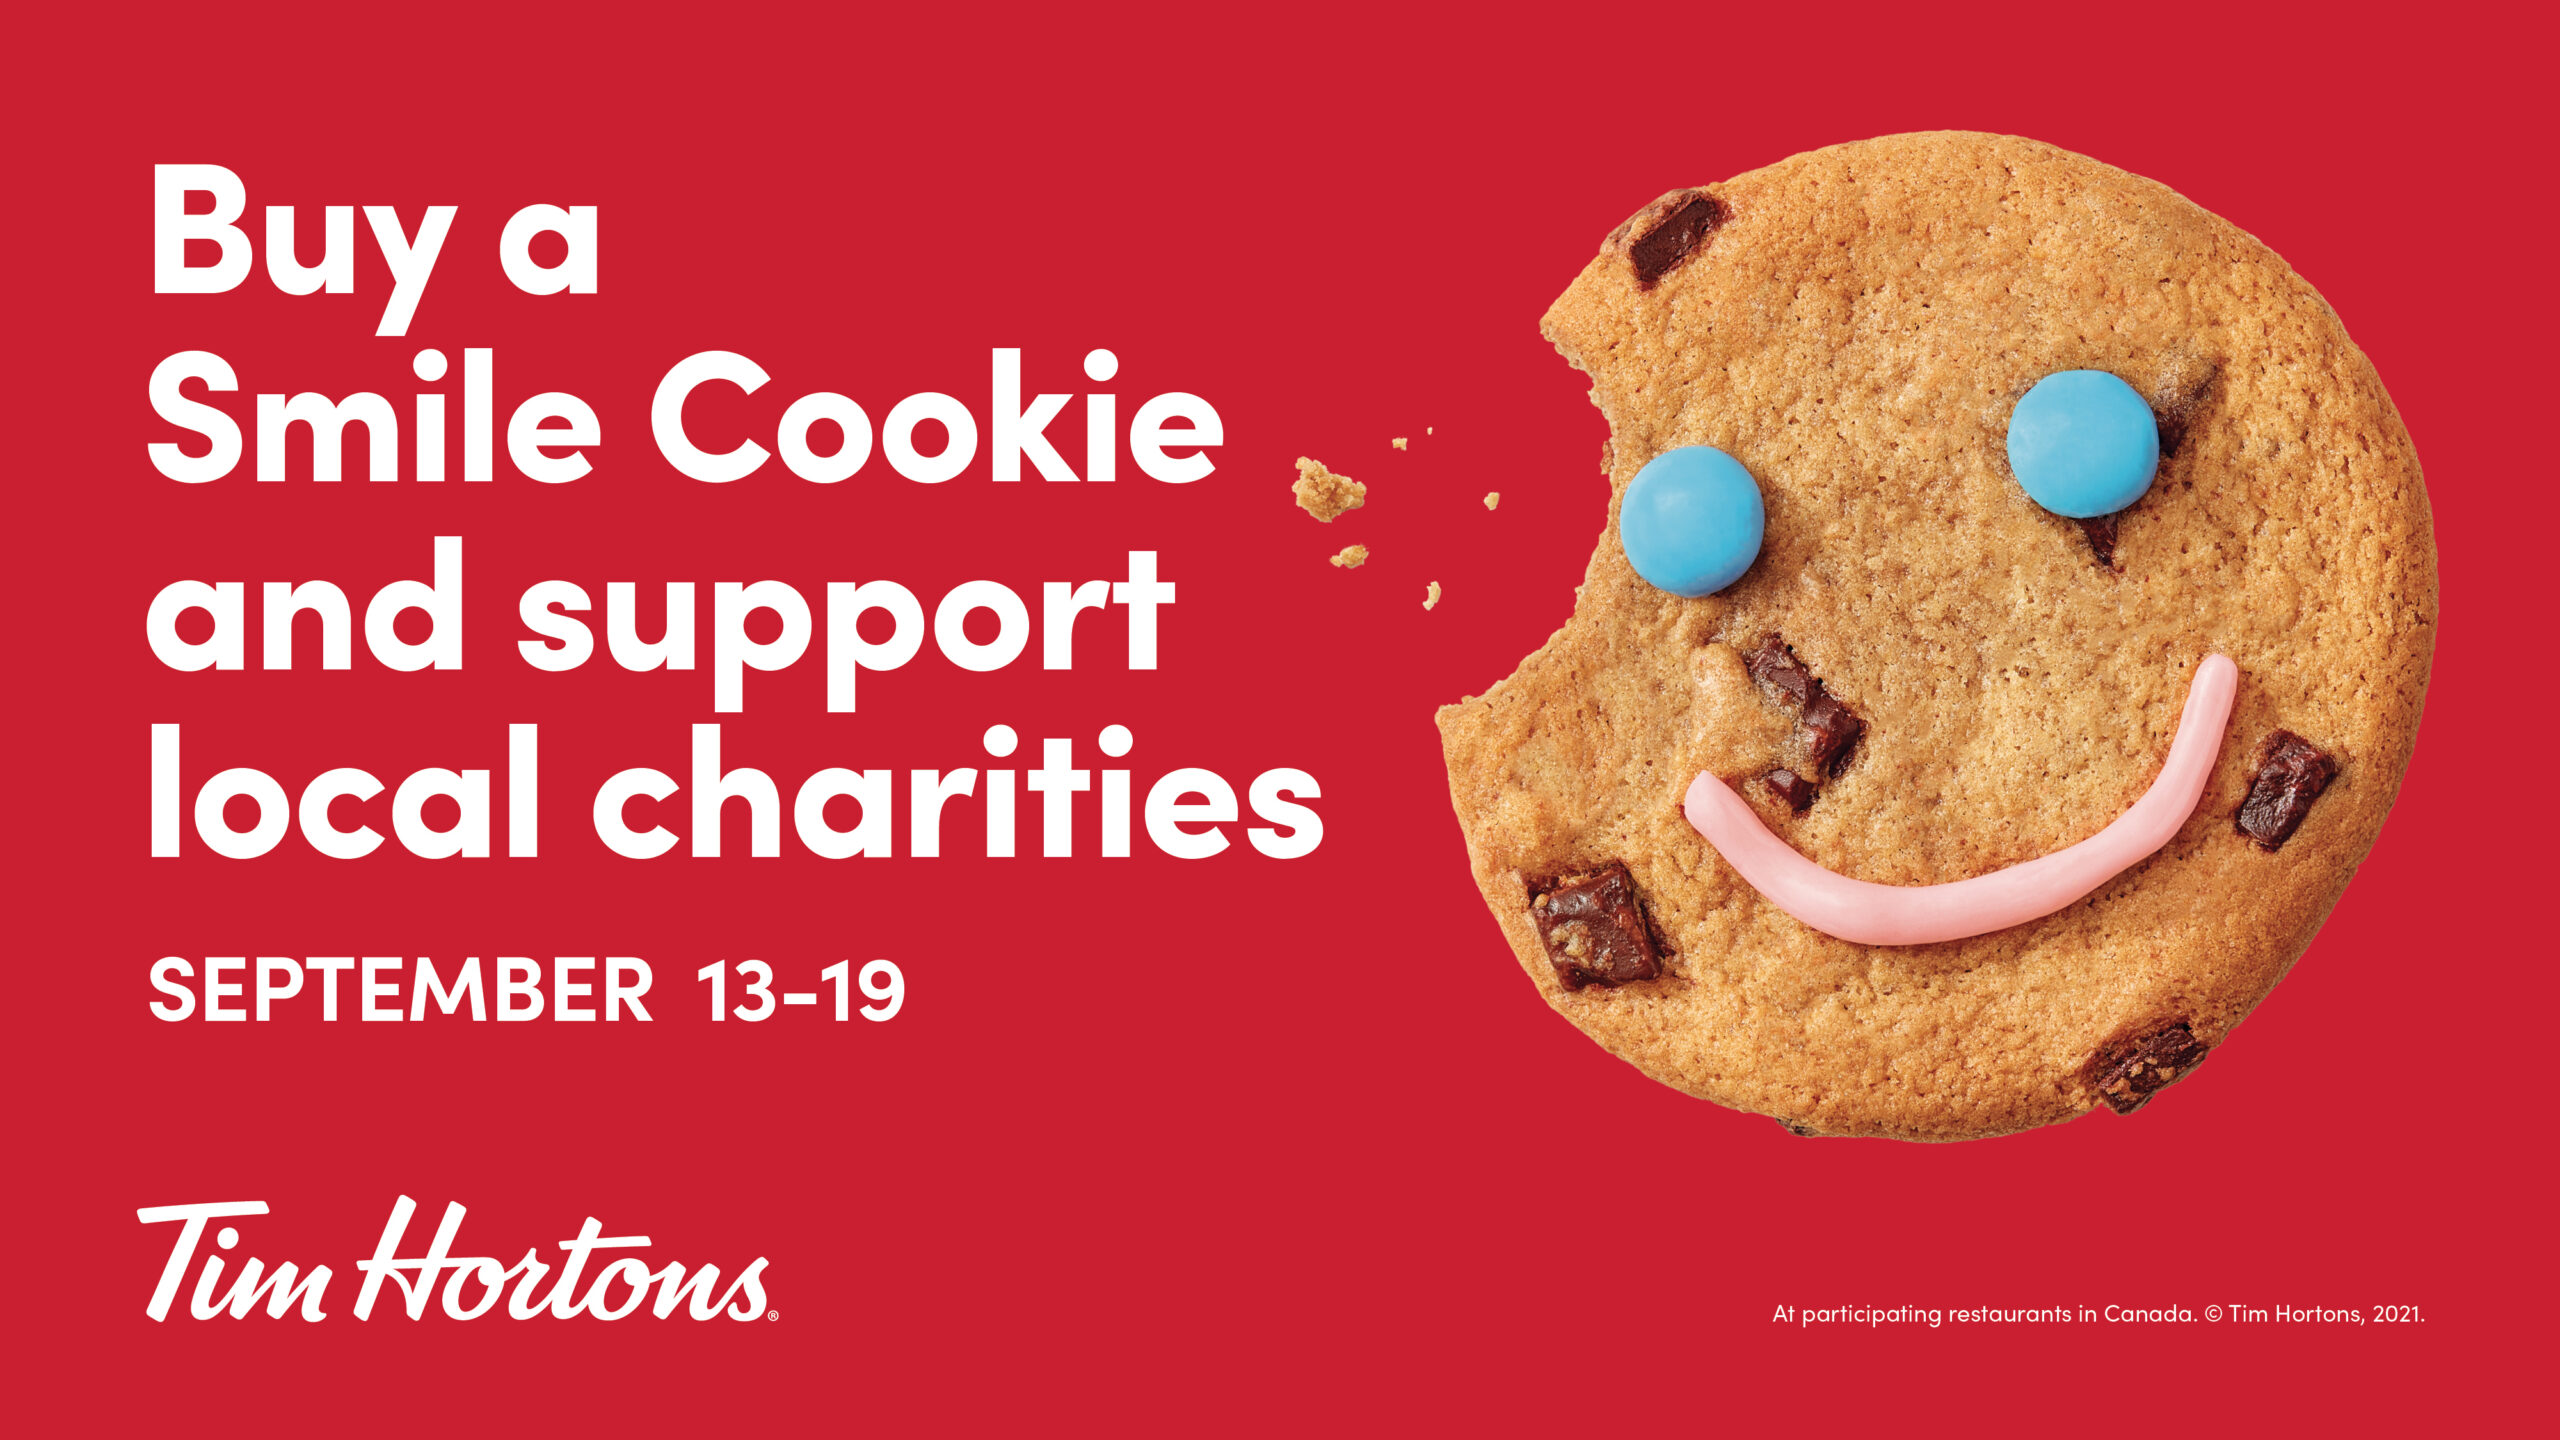 Tim Hortons annual Smile Cookie campaign is back on September 13, in